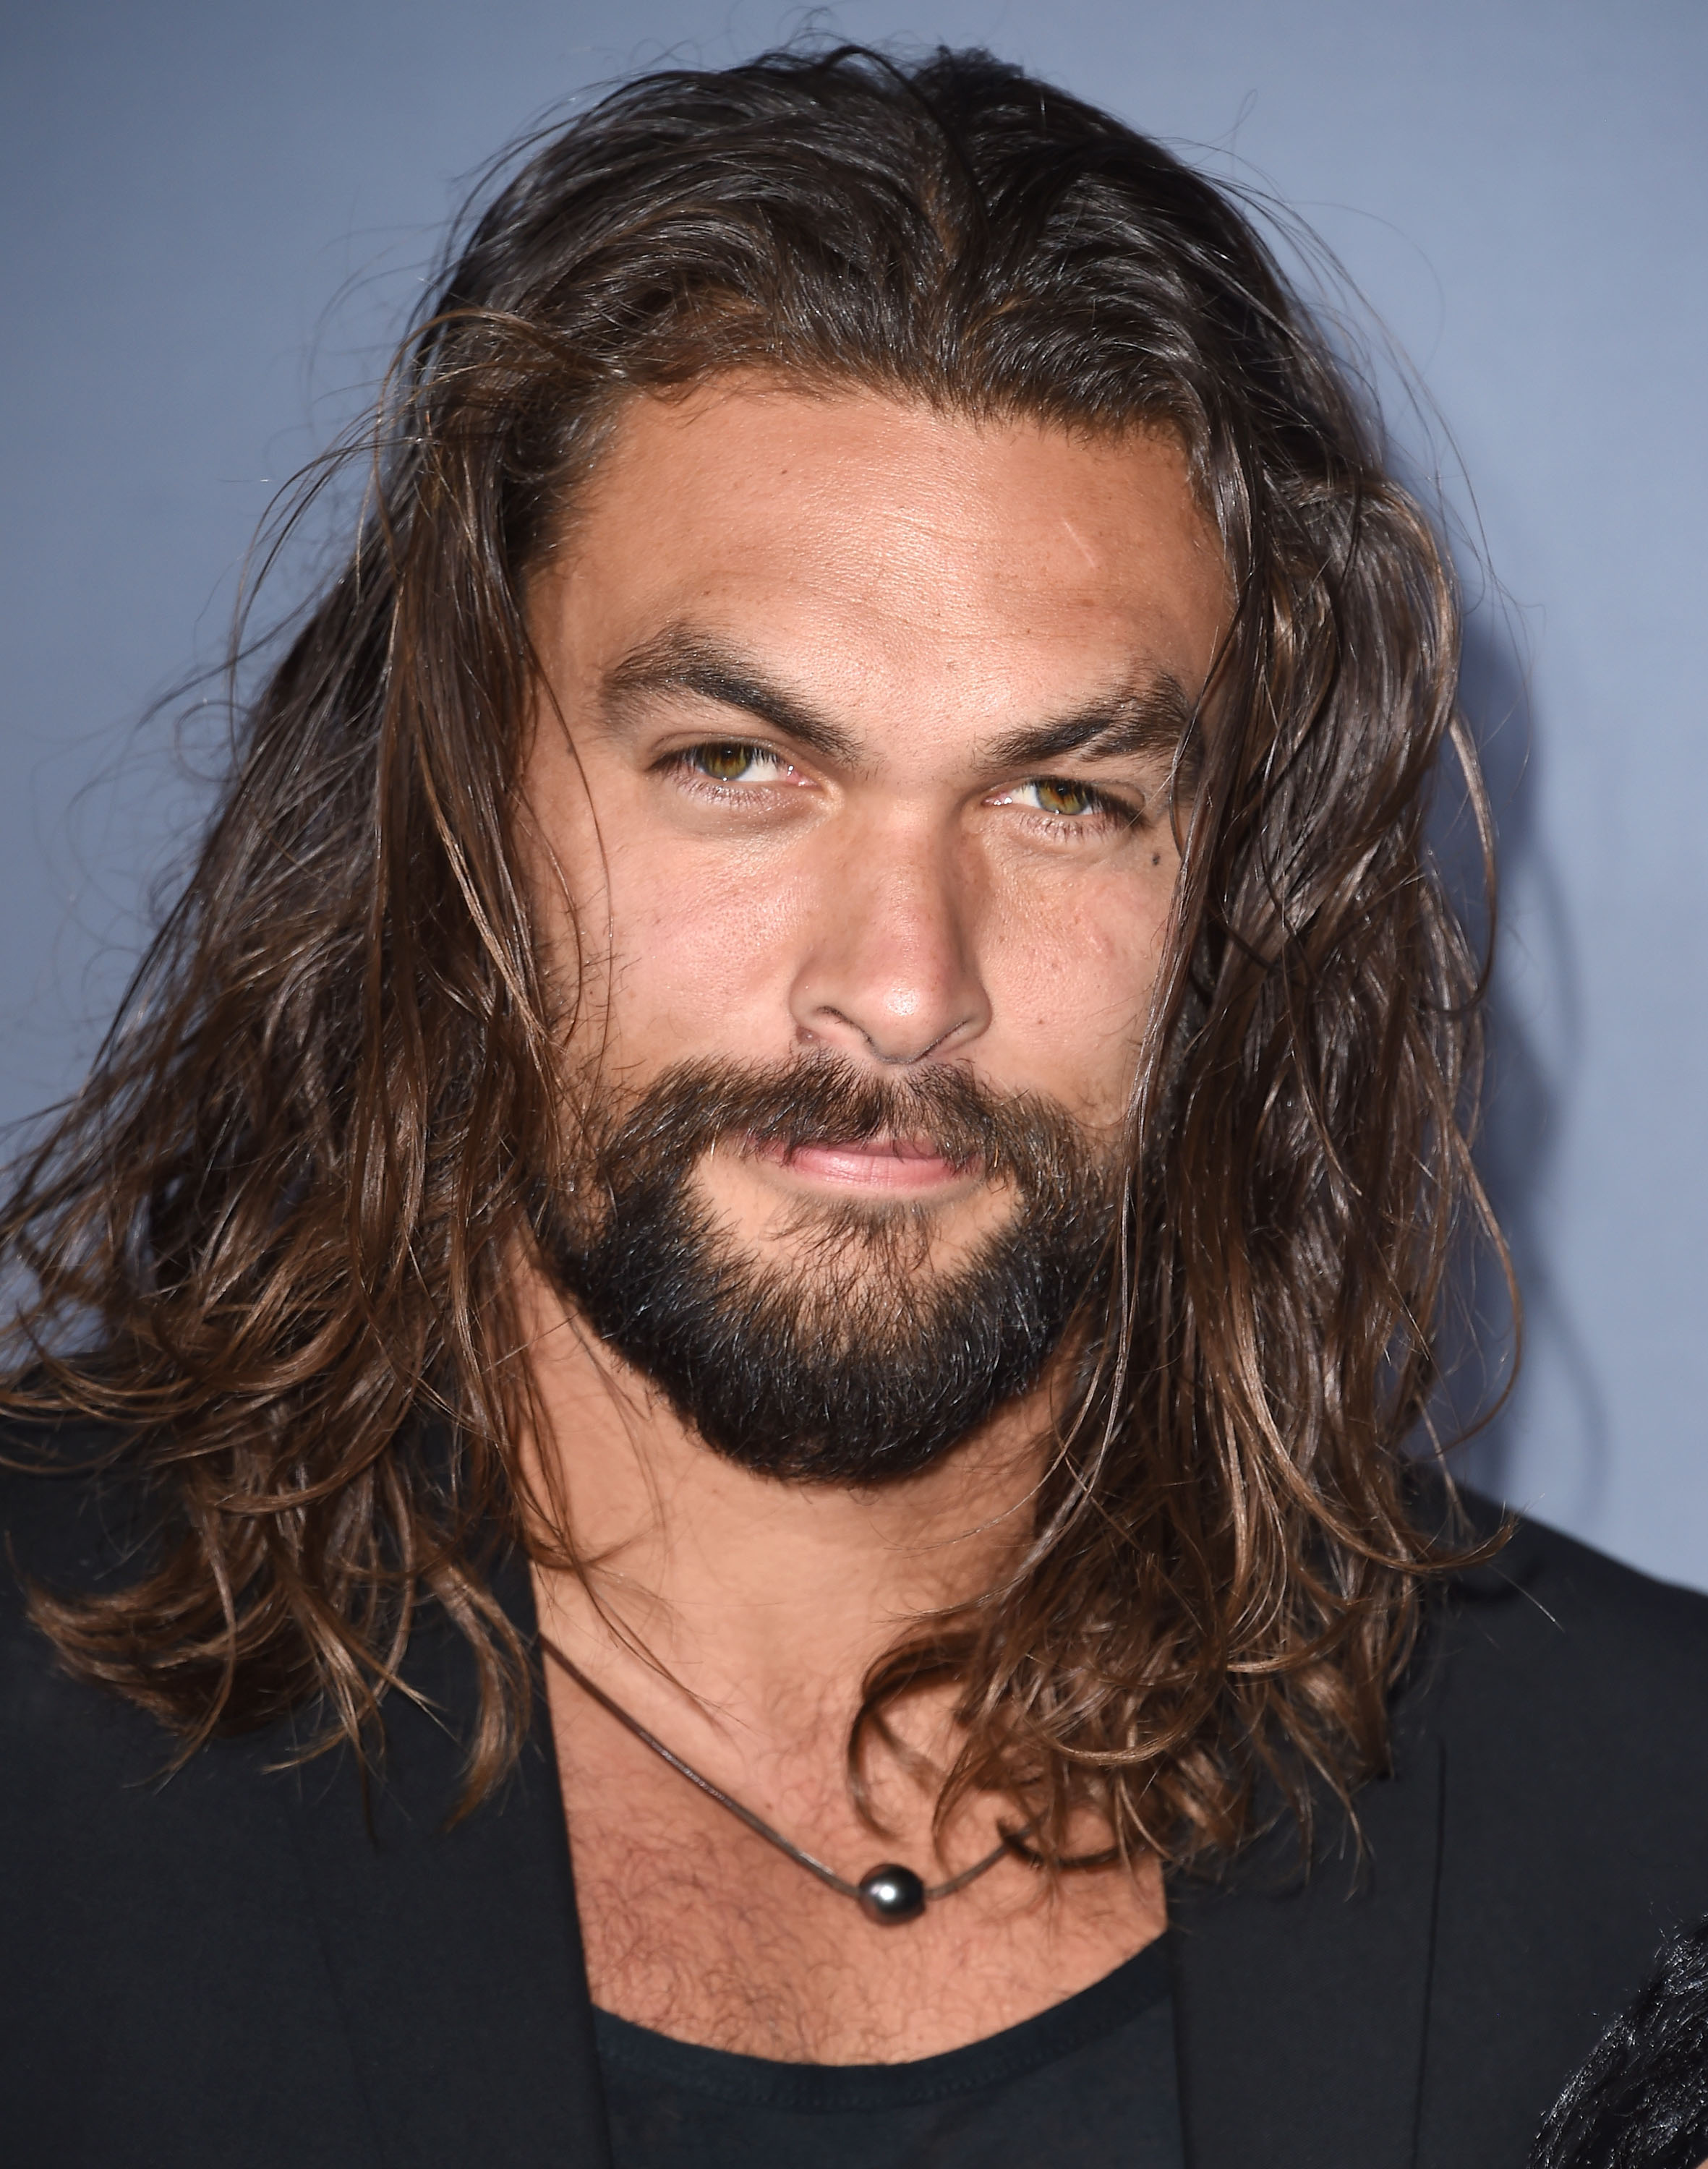 Jason Momoa at the InStyle Awards in Los Angeles on Oct. 26, 2015.